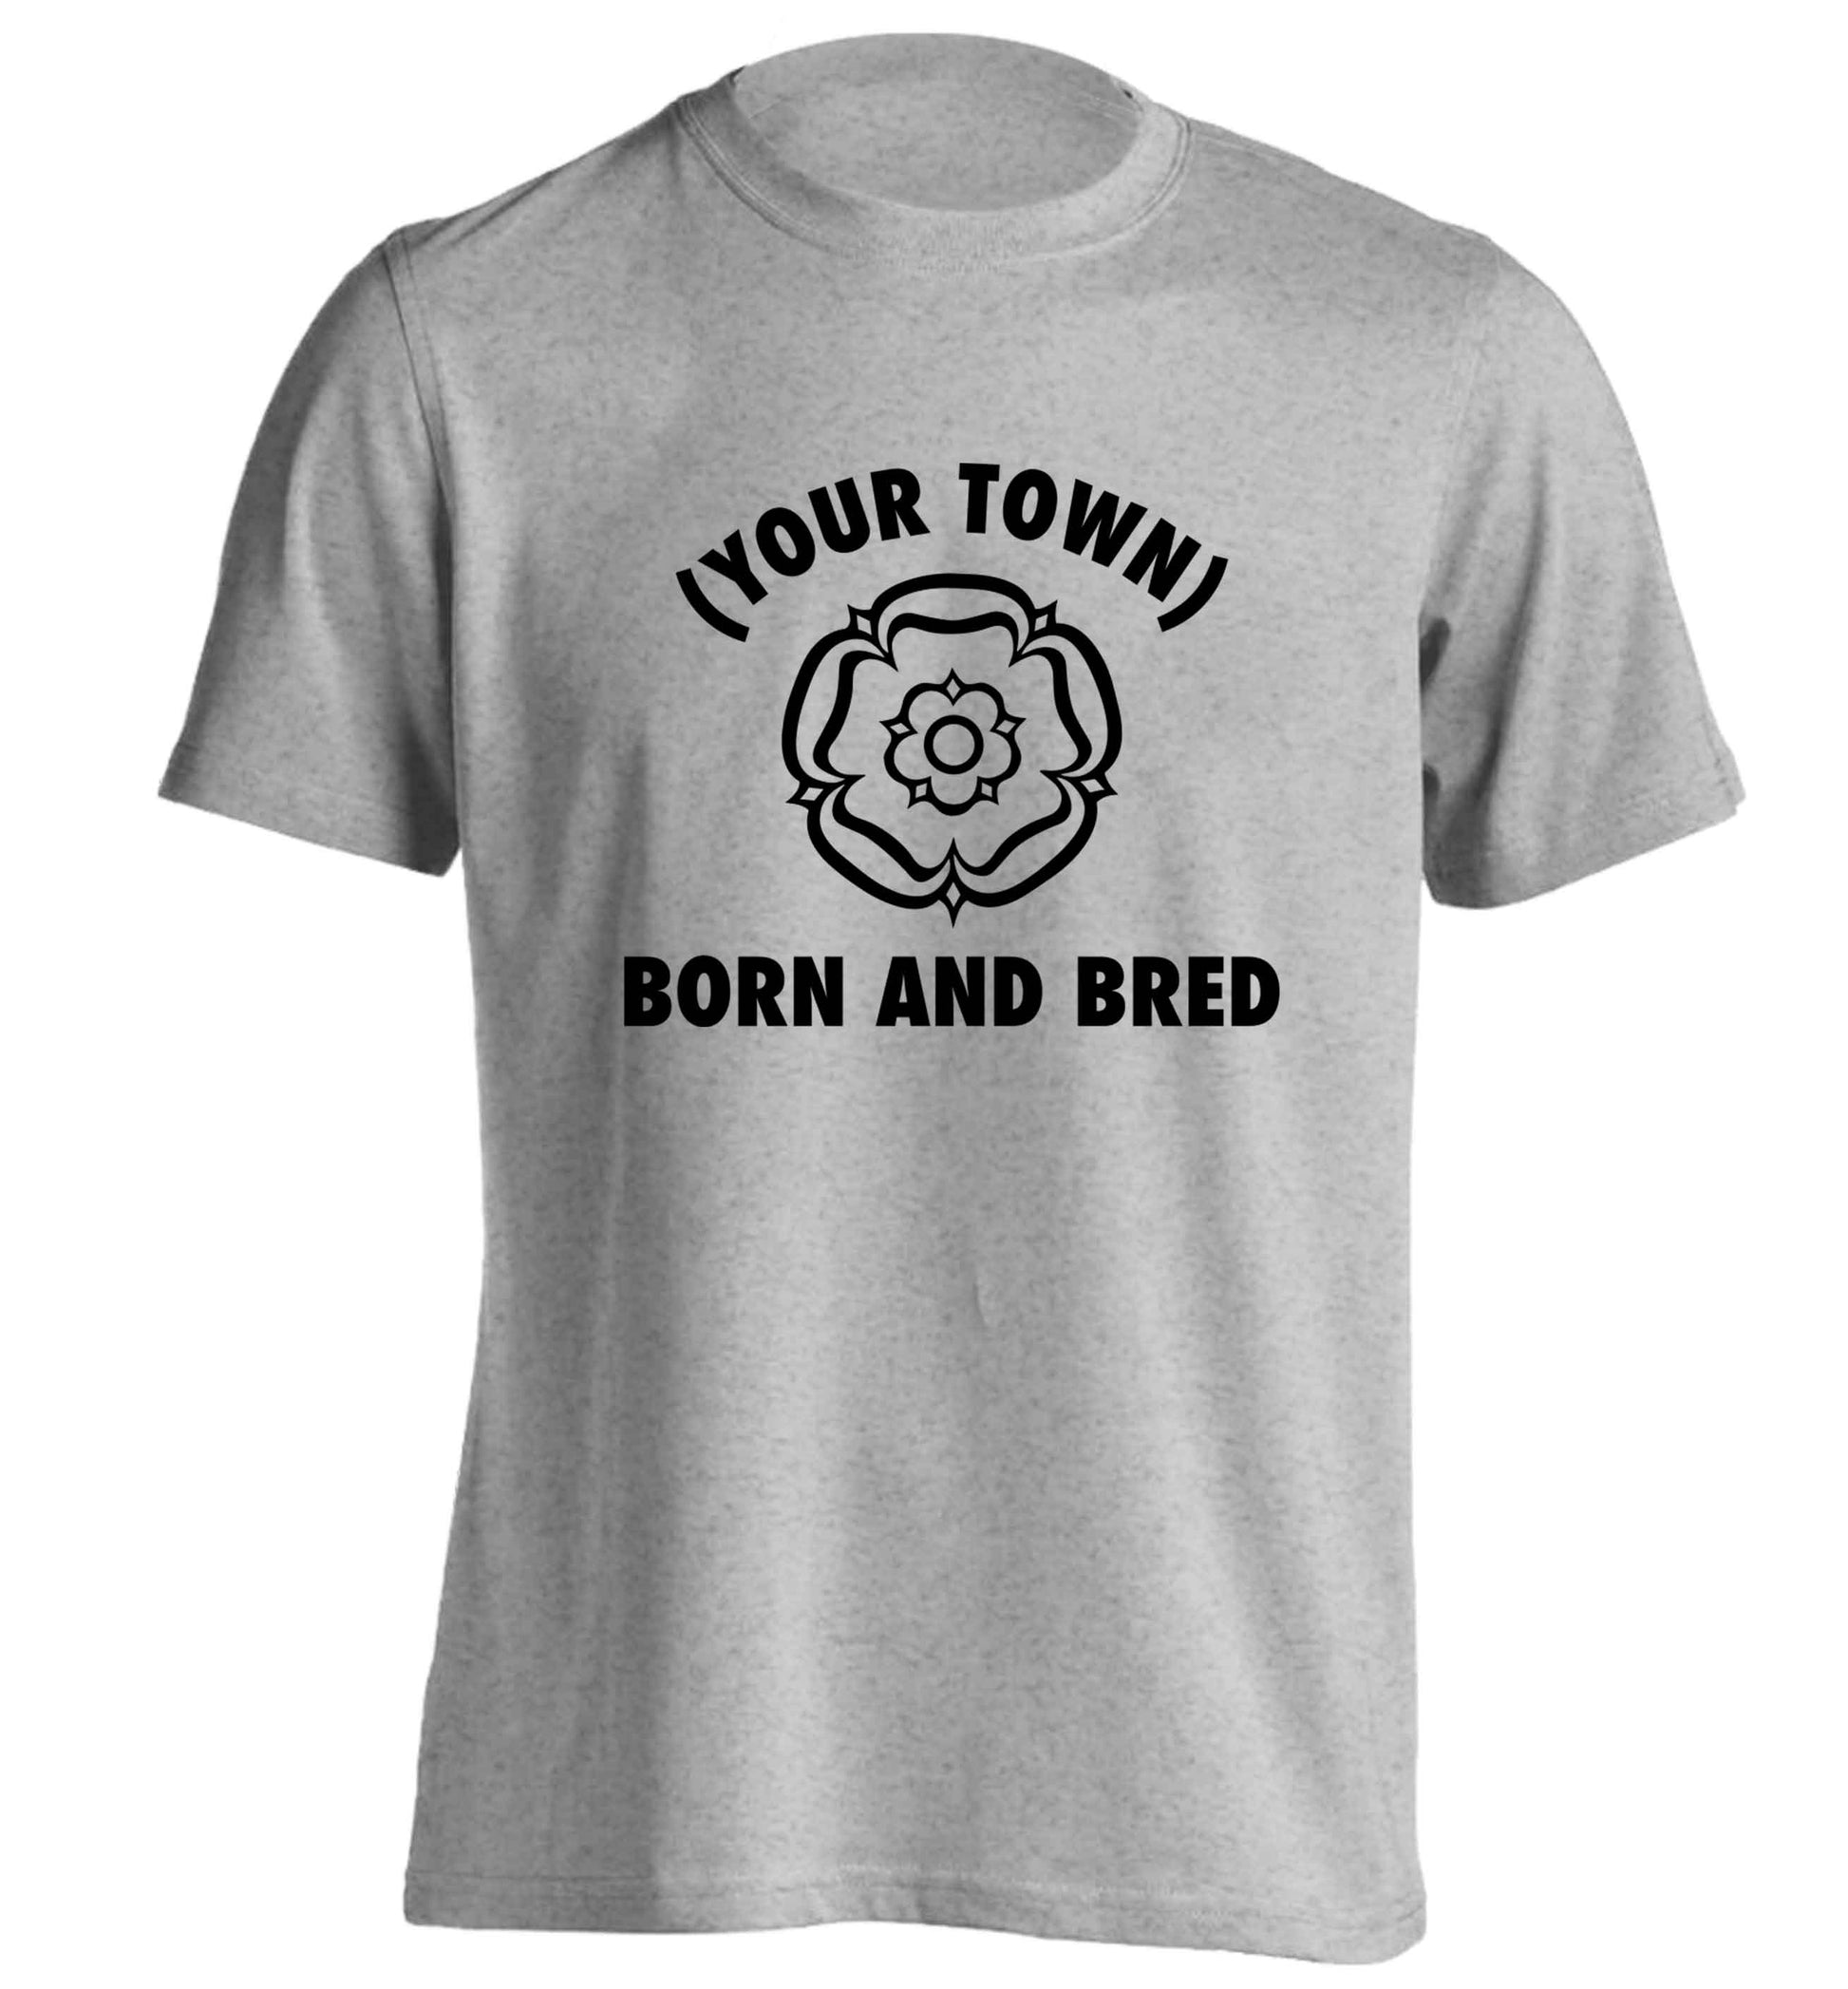 Personalised born and bred adults unisex grey Tshirt 2XL